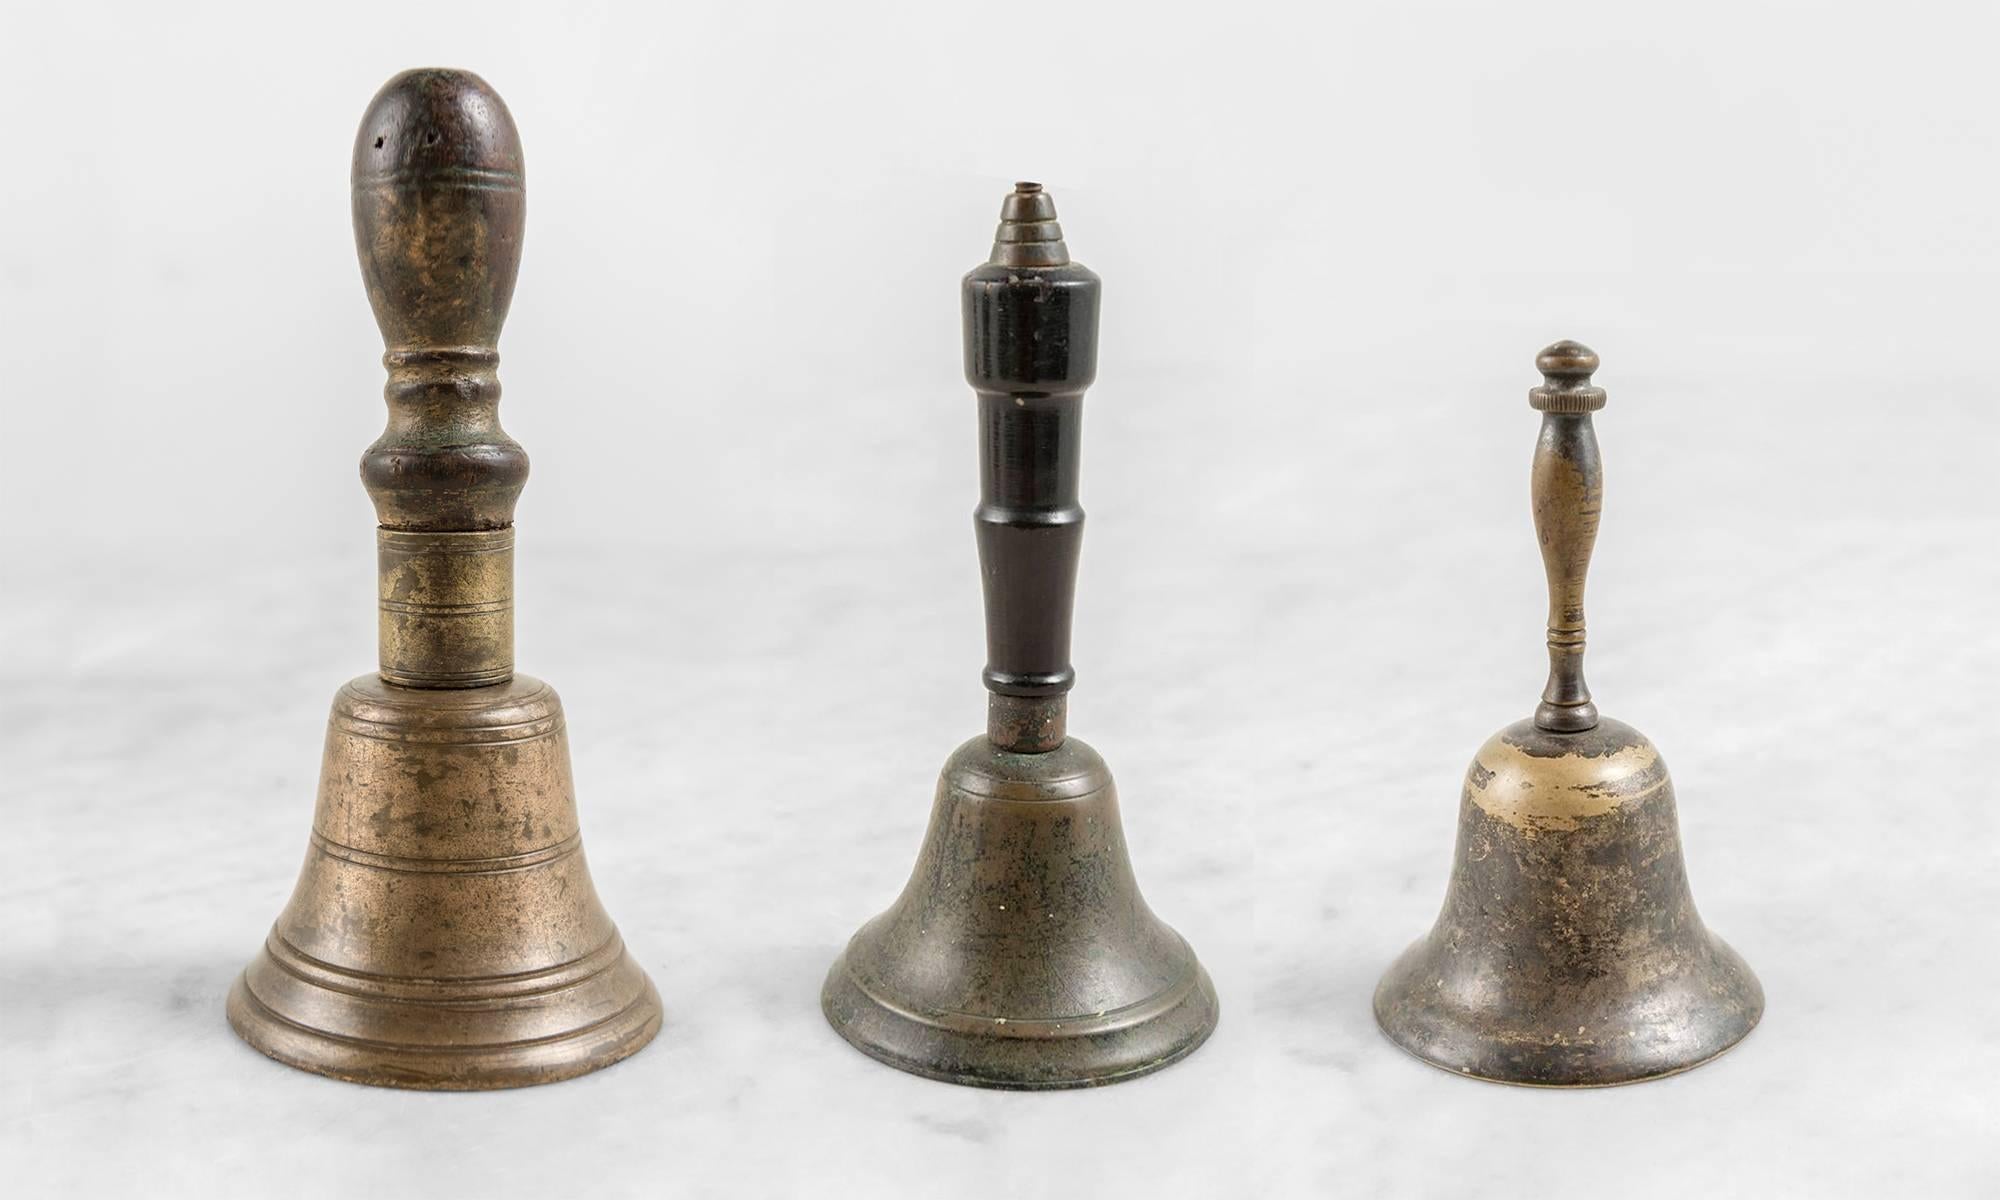 Assortment of hand bells with turned and ebonized handles.

Made in America, circa 1900-1940.